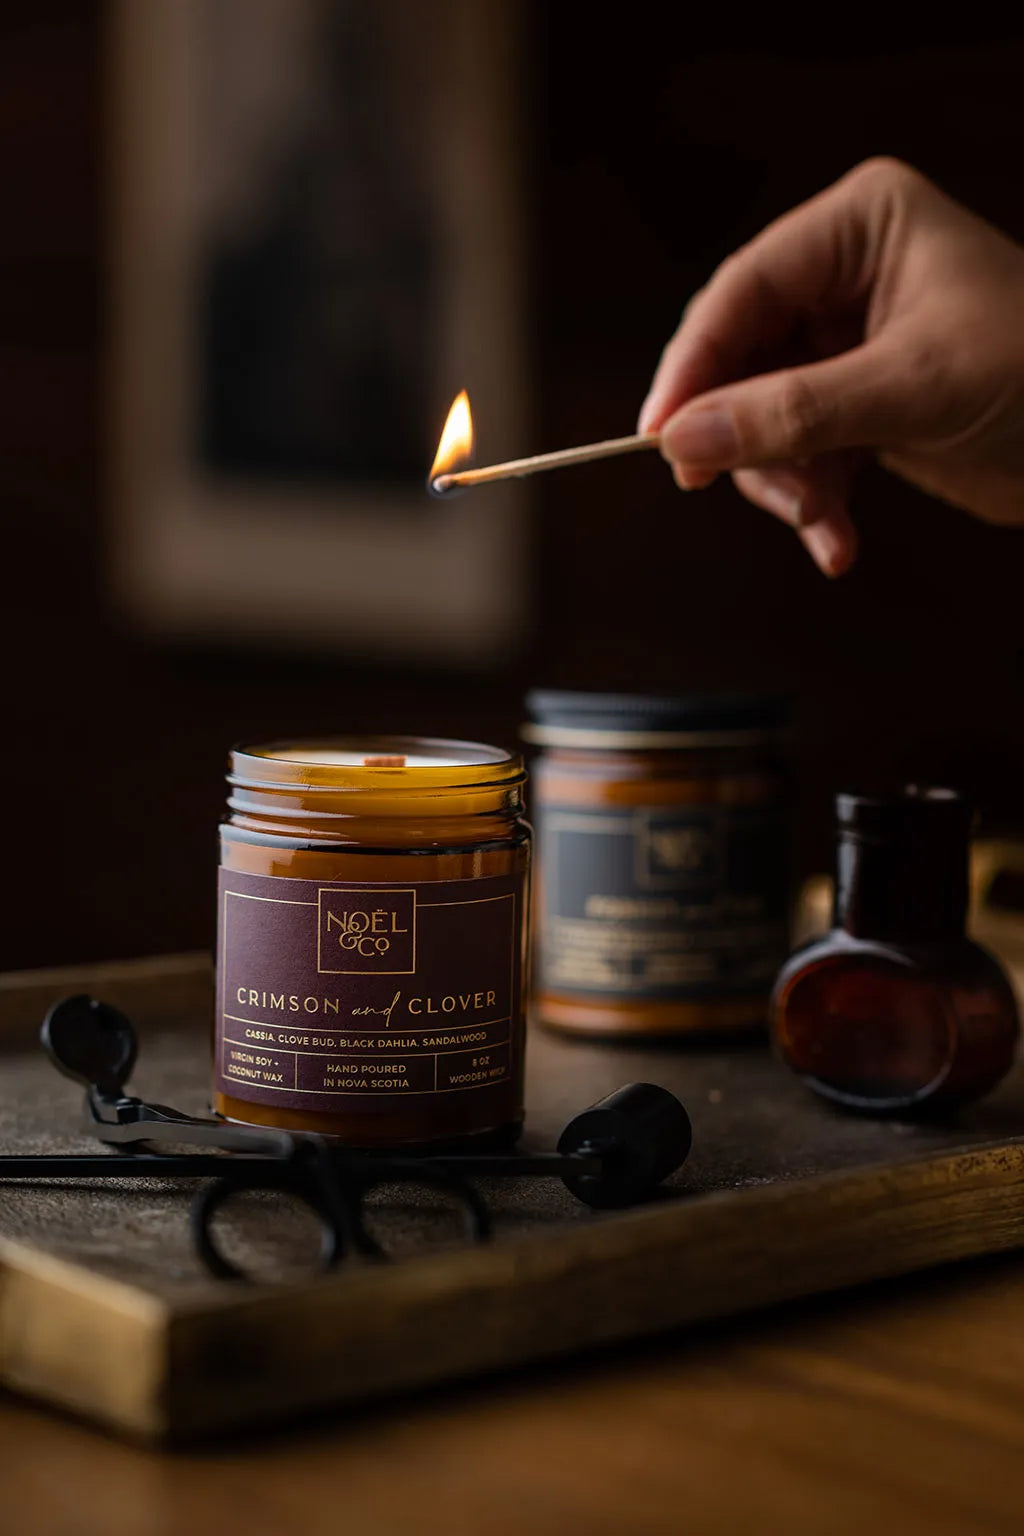 Two candle in amber glass jars. One with a black lid and one without a lid. A hand holding a lit match above the candle without the lid.